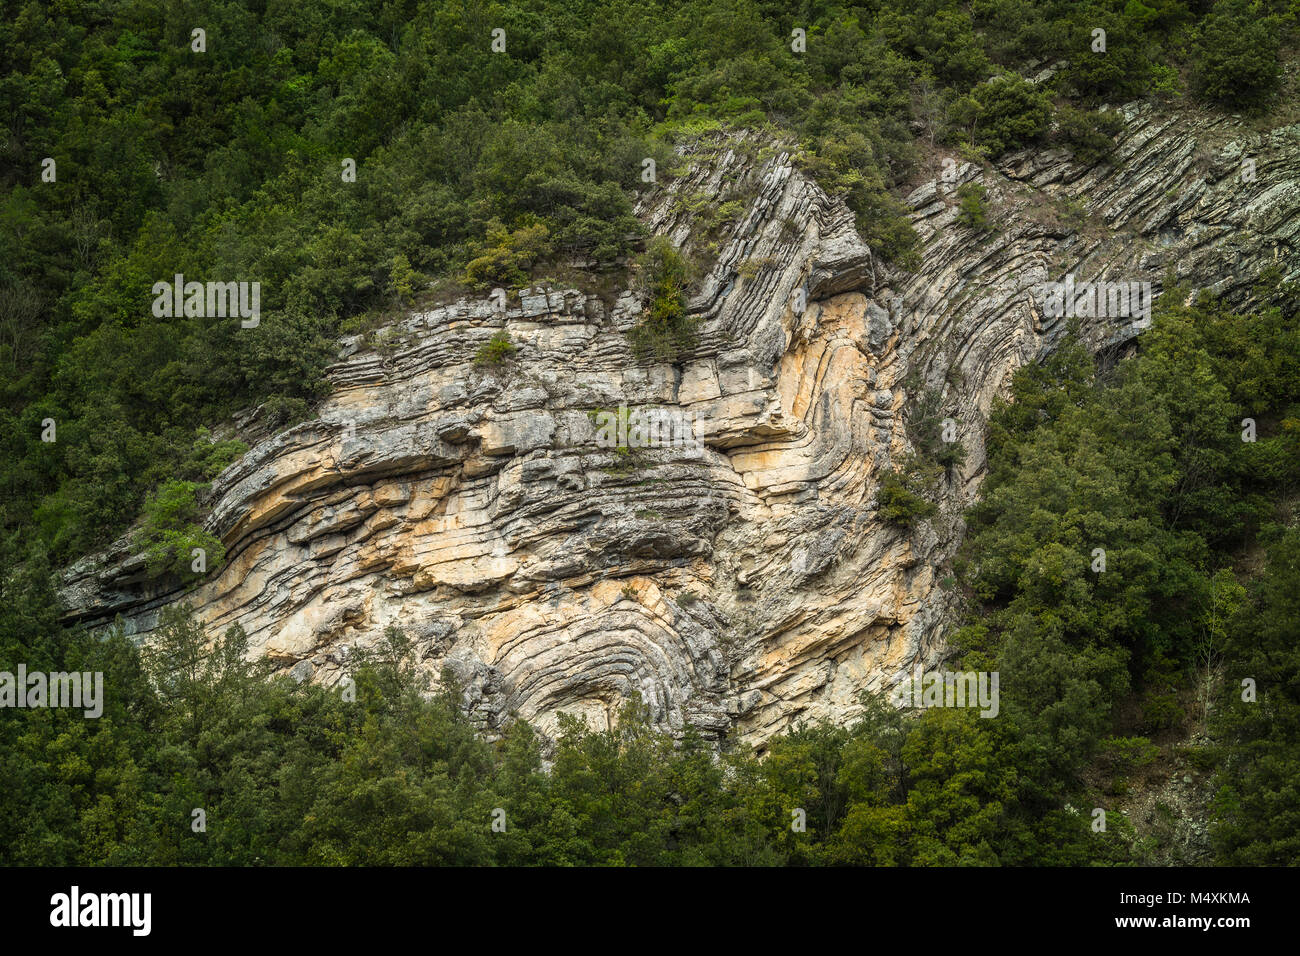 layers of sandstone sediments deformed by geological forces. Gran Sasso National Park and Monti della Laga, Abruzzo, Italy, Europe Stock Photo